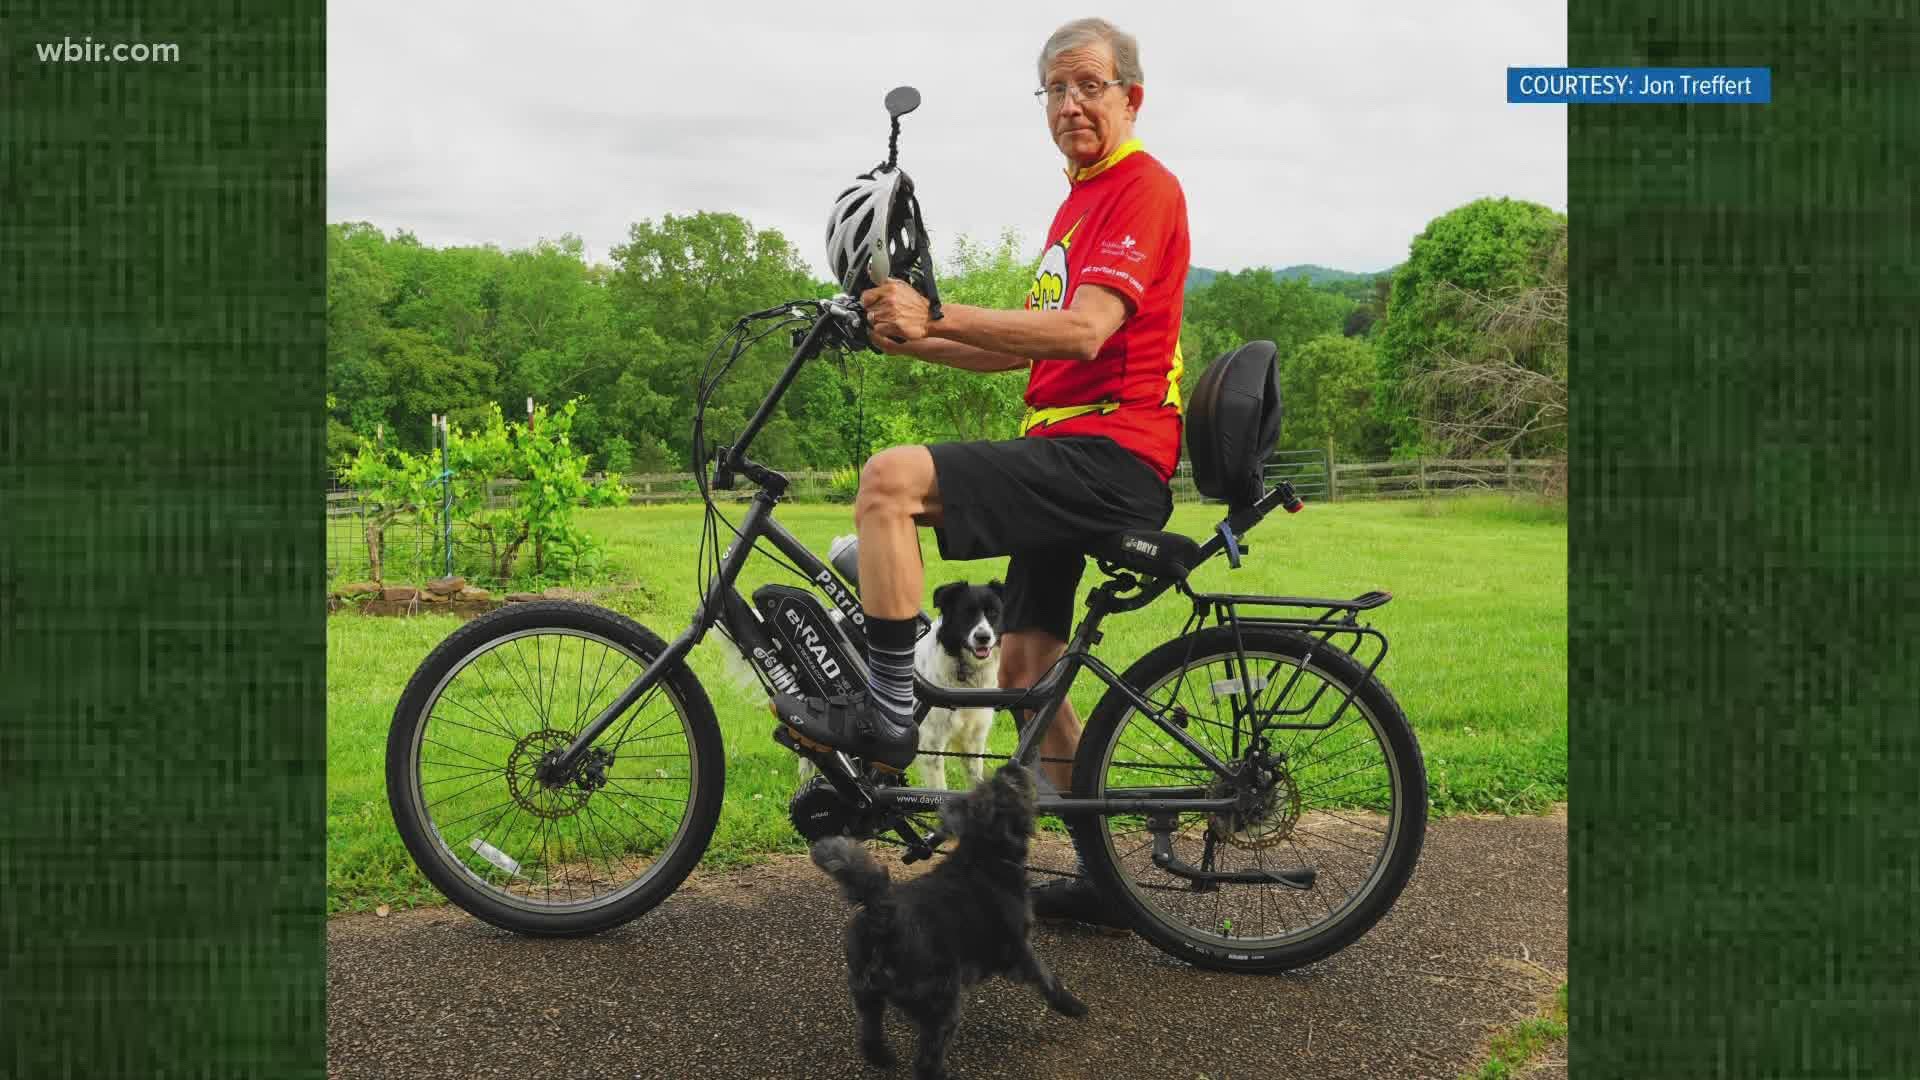 The scale said 270 pounds and Jon Treffert knew he had to lose weight. An e-bike gave him confidence to ease into exercising.